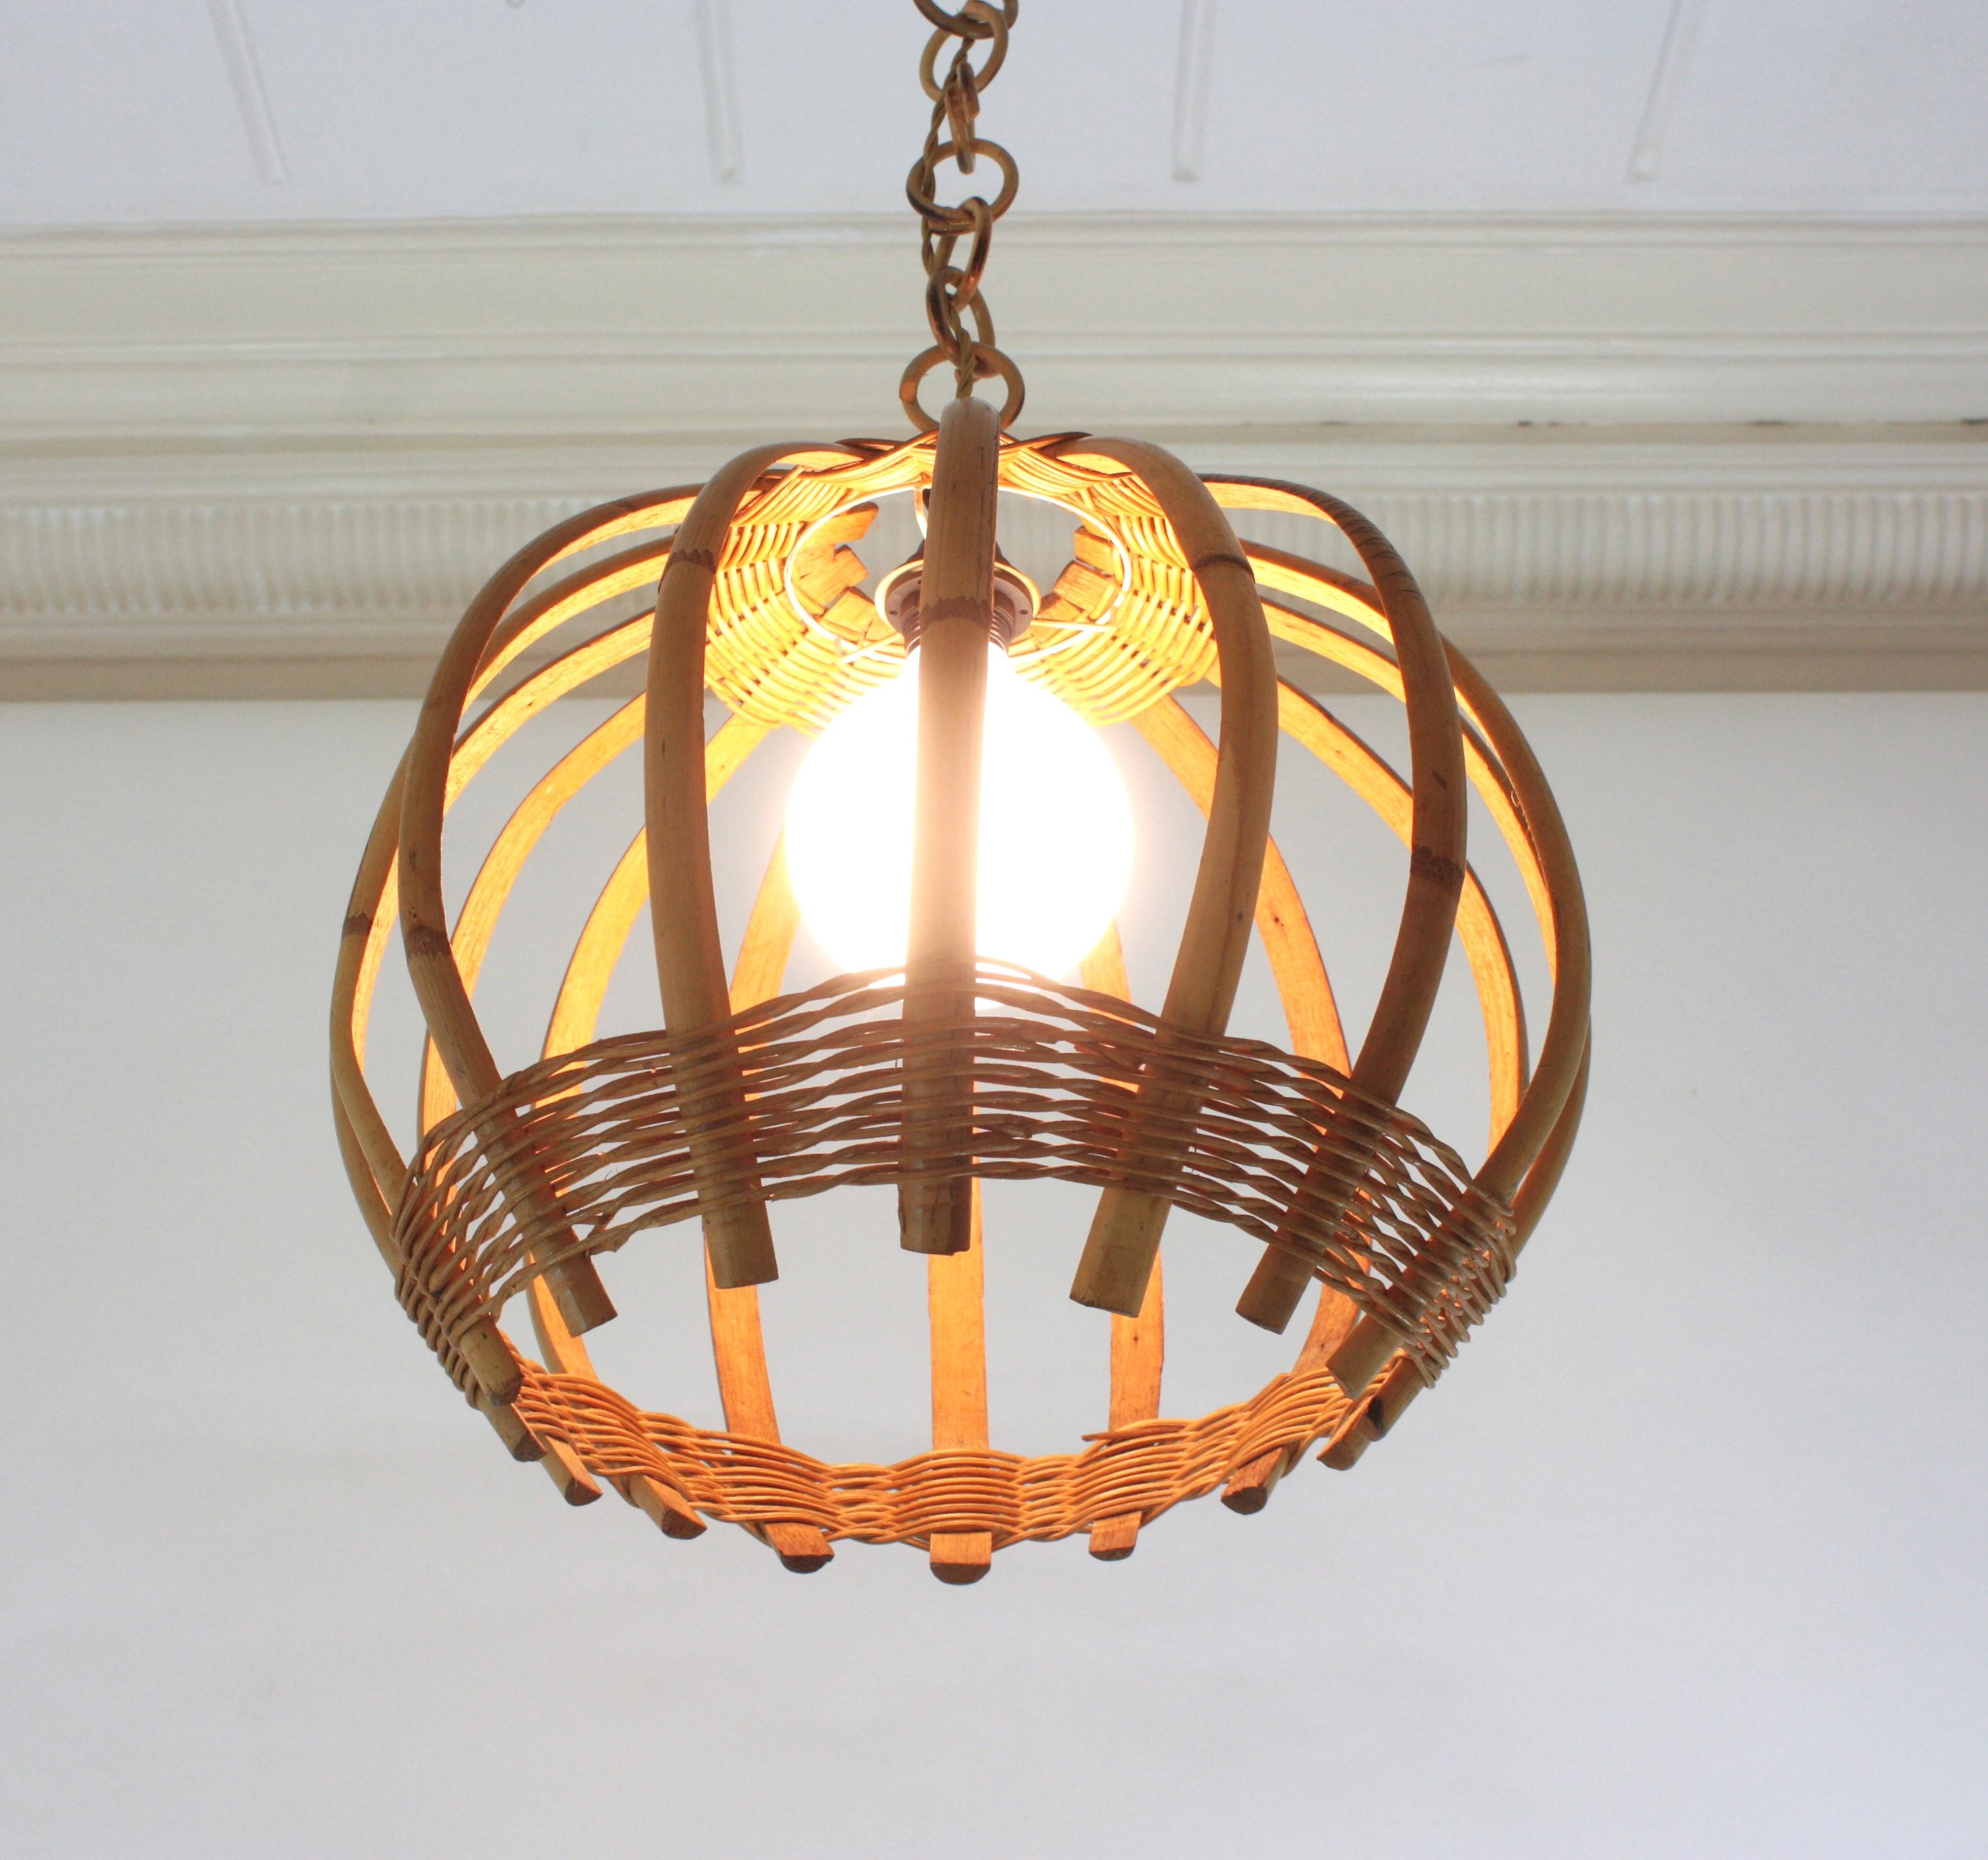 20th Century 1960s Large Bamboo Rattan Round Shaped Pendant Light with Woven Wicker Detail For Sale